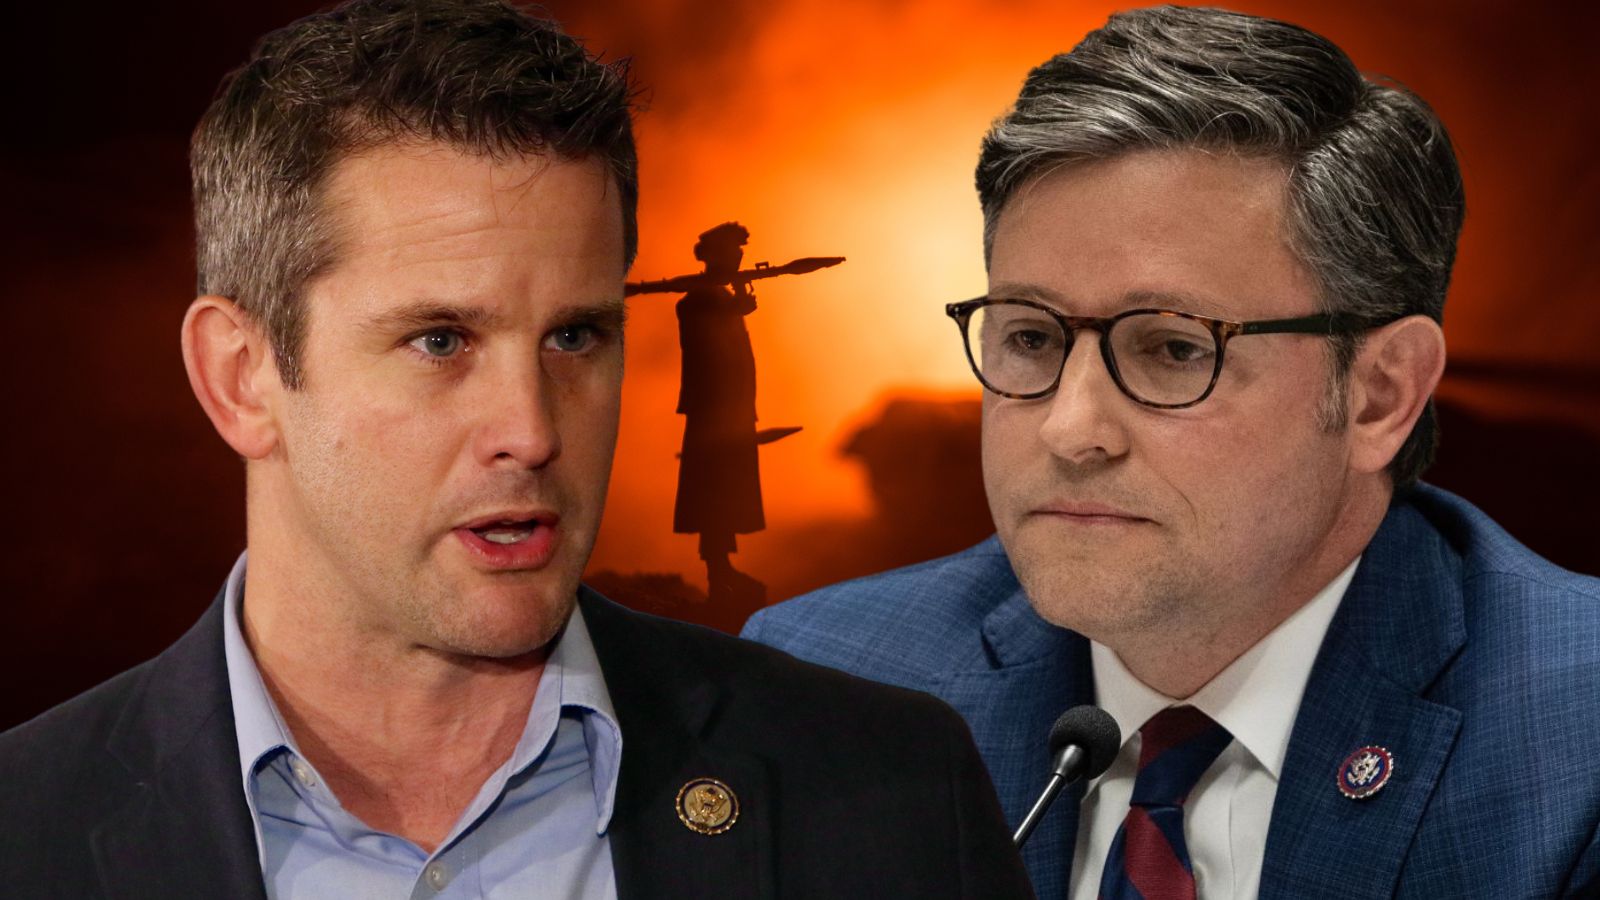 “There Is No Difference Between Christian Nationalism and the Taliban”: Former GOP Rep. Adam Kinzinger Hits Out at House Speaker Johnson’s Extremist Views